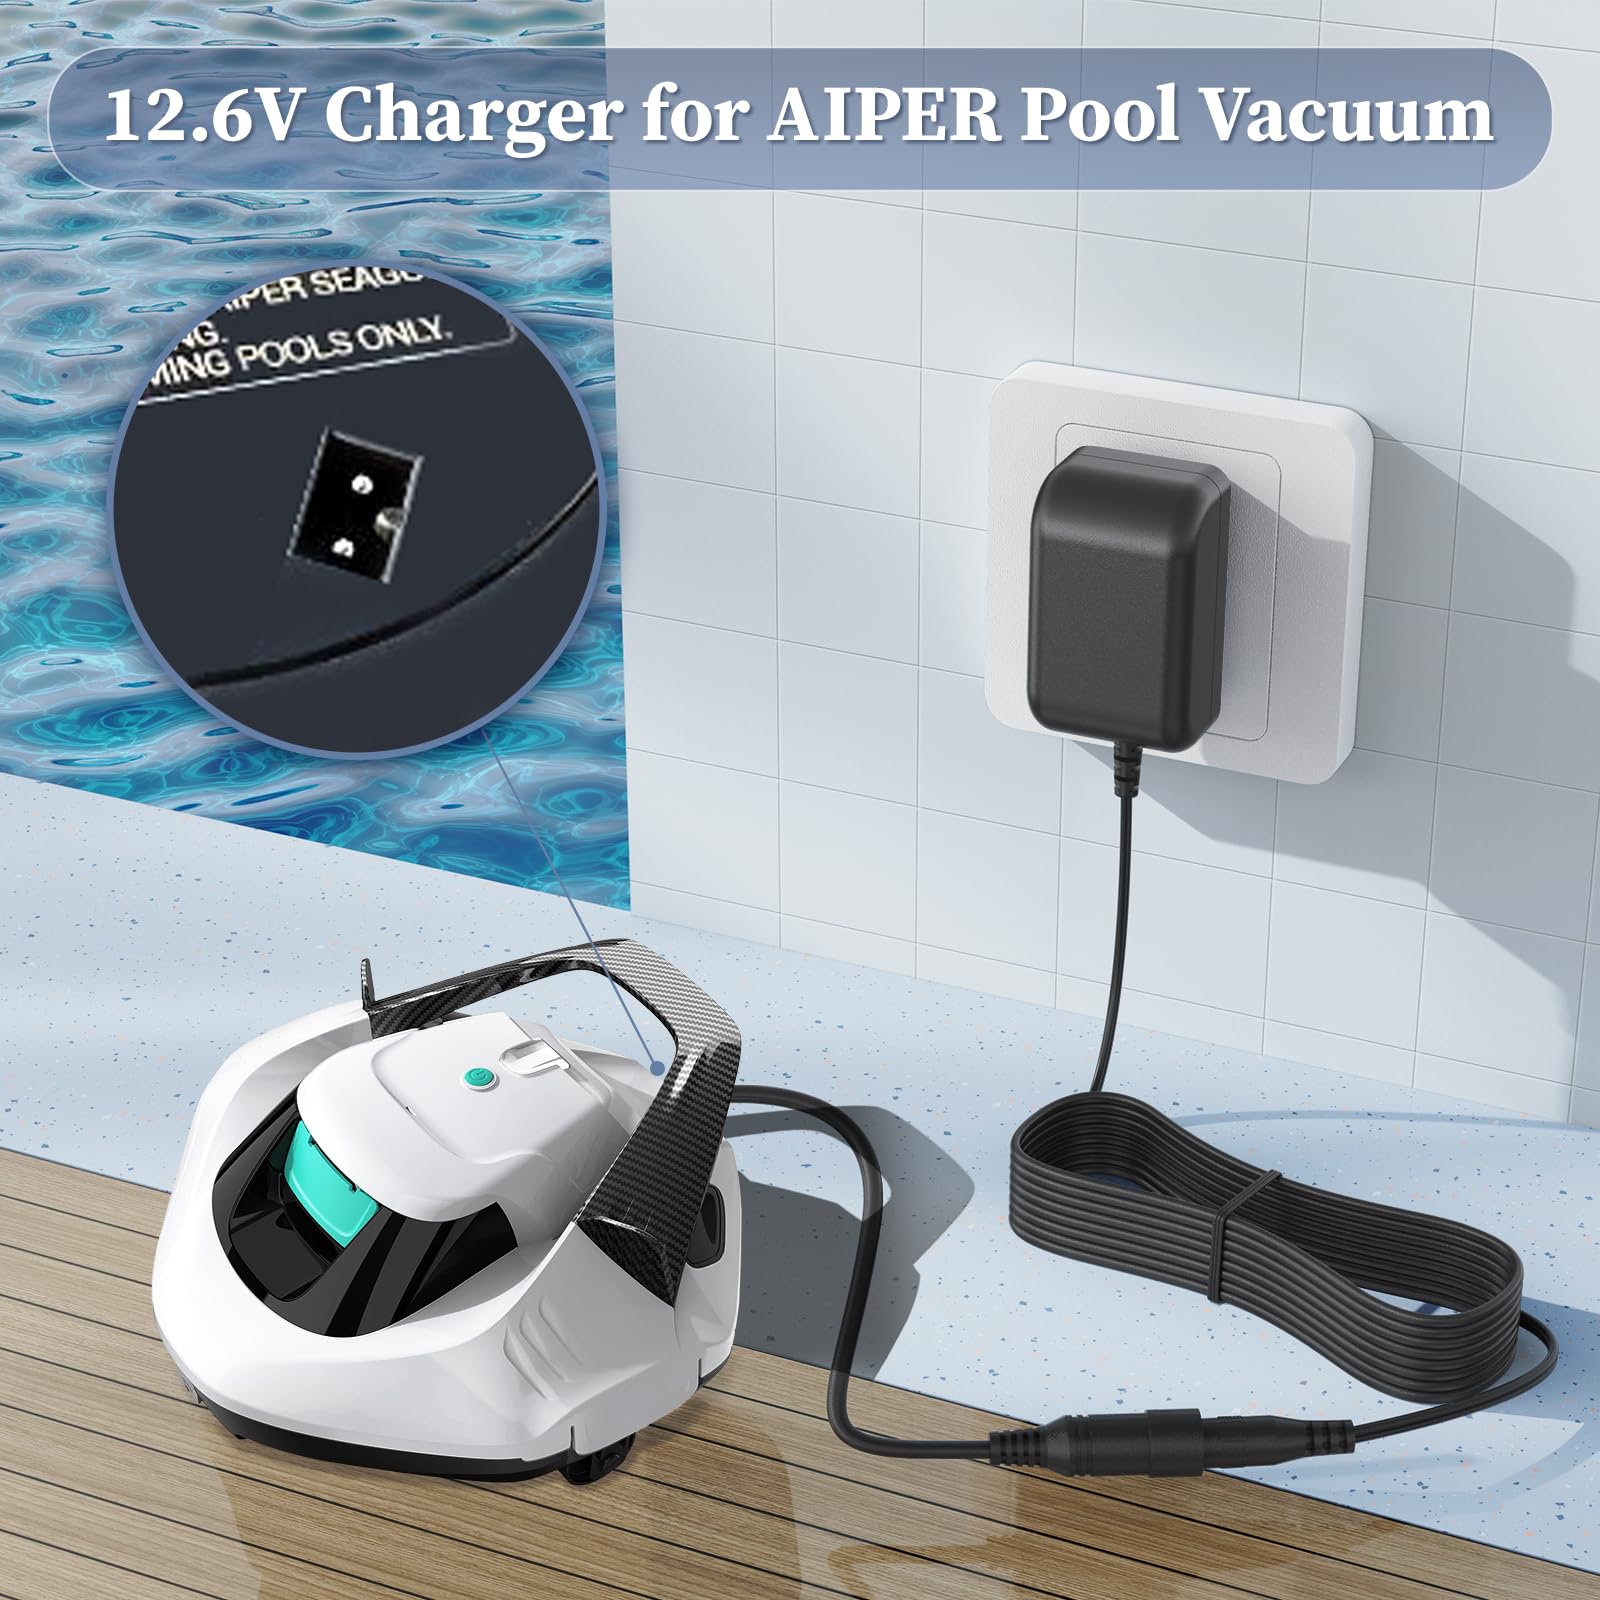 12.6V AC/DC Adapter for Aiper P1111 Pilot H1 Seagull 600 1000 1500 HJ1102 HJ1103J AI-P1111-AMUS-A Rechargeable Pool Vacuum Cleaner Charger Power Cord UL Listed DC Adaptor Supply